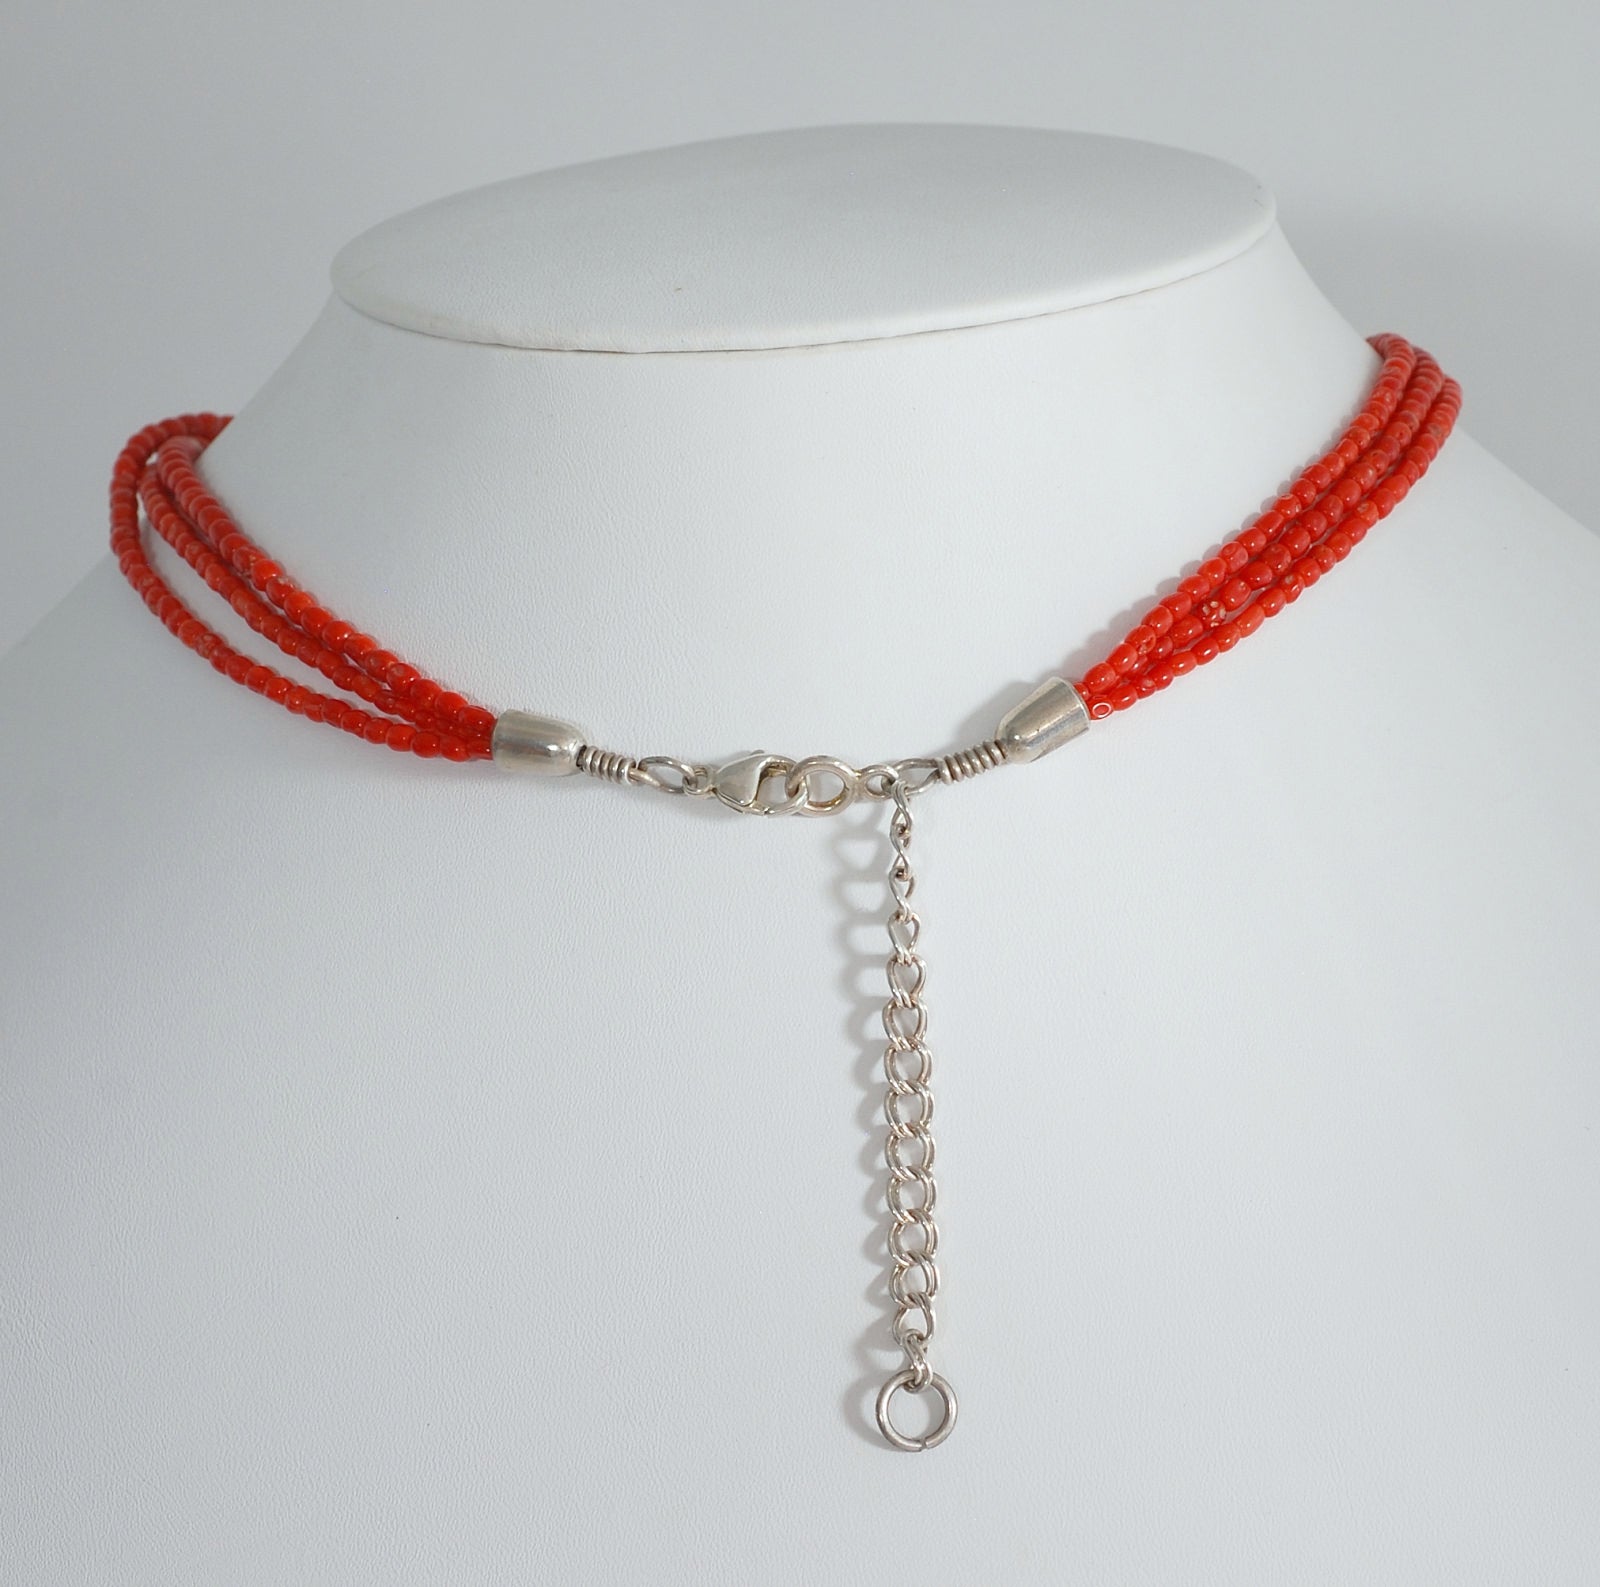 Red Coral 3-Strand Necklace